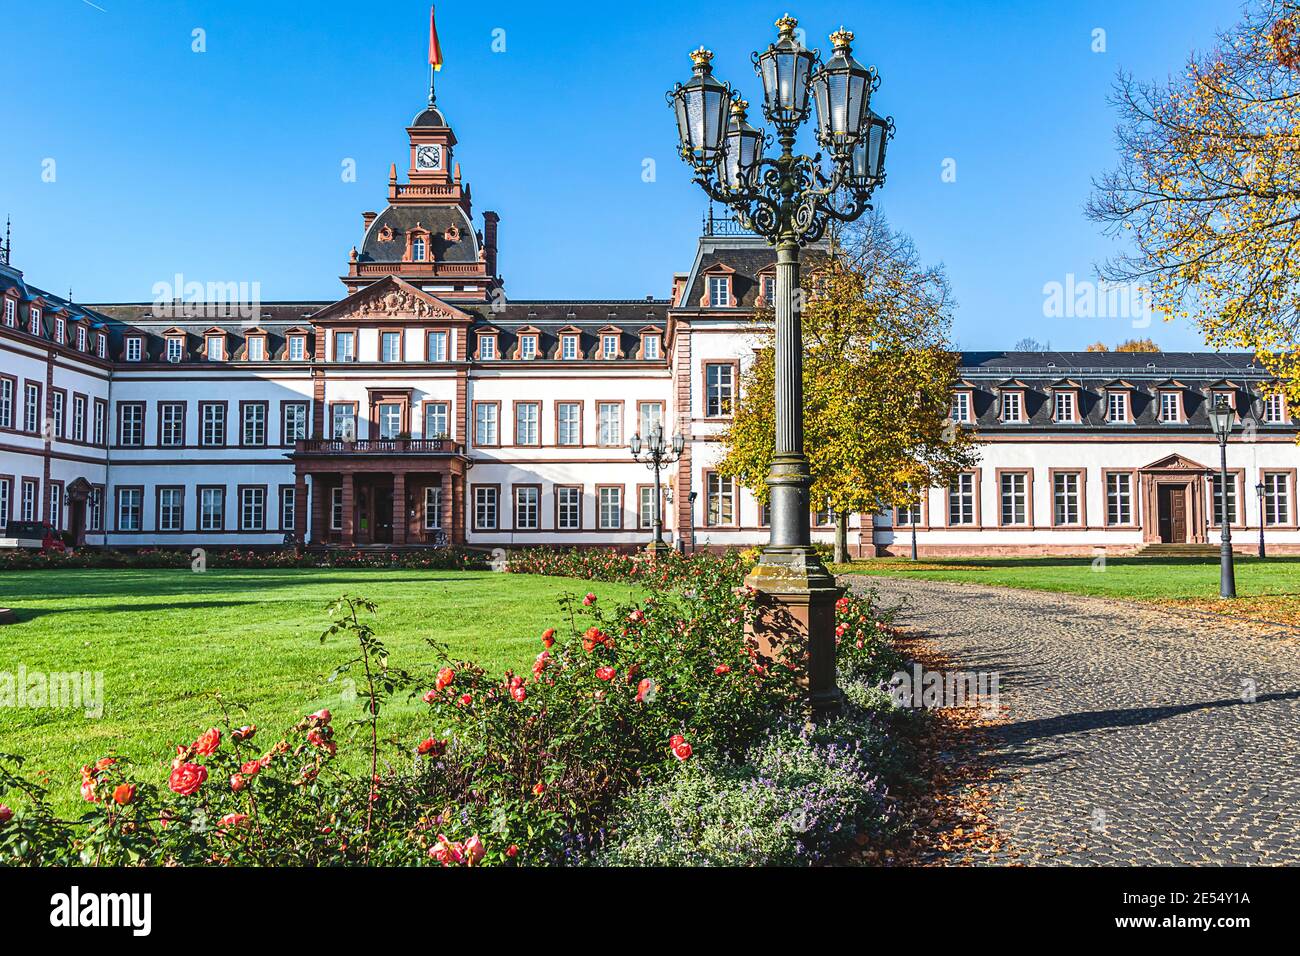 Baroque Phillipsruhe Castle on the banks of river Main in Hanau, Germany Stock Photo